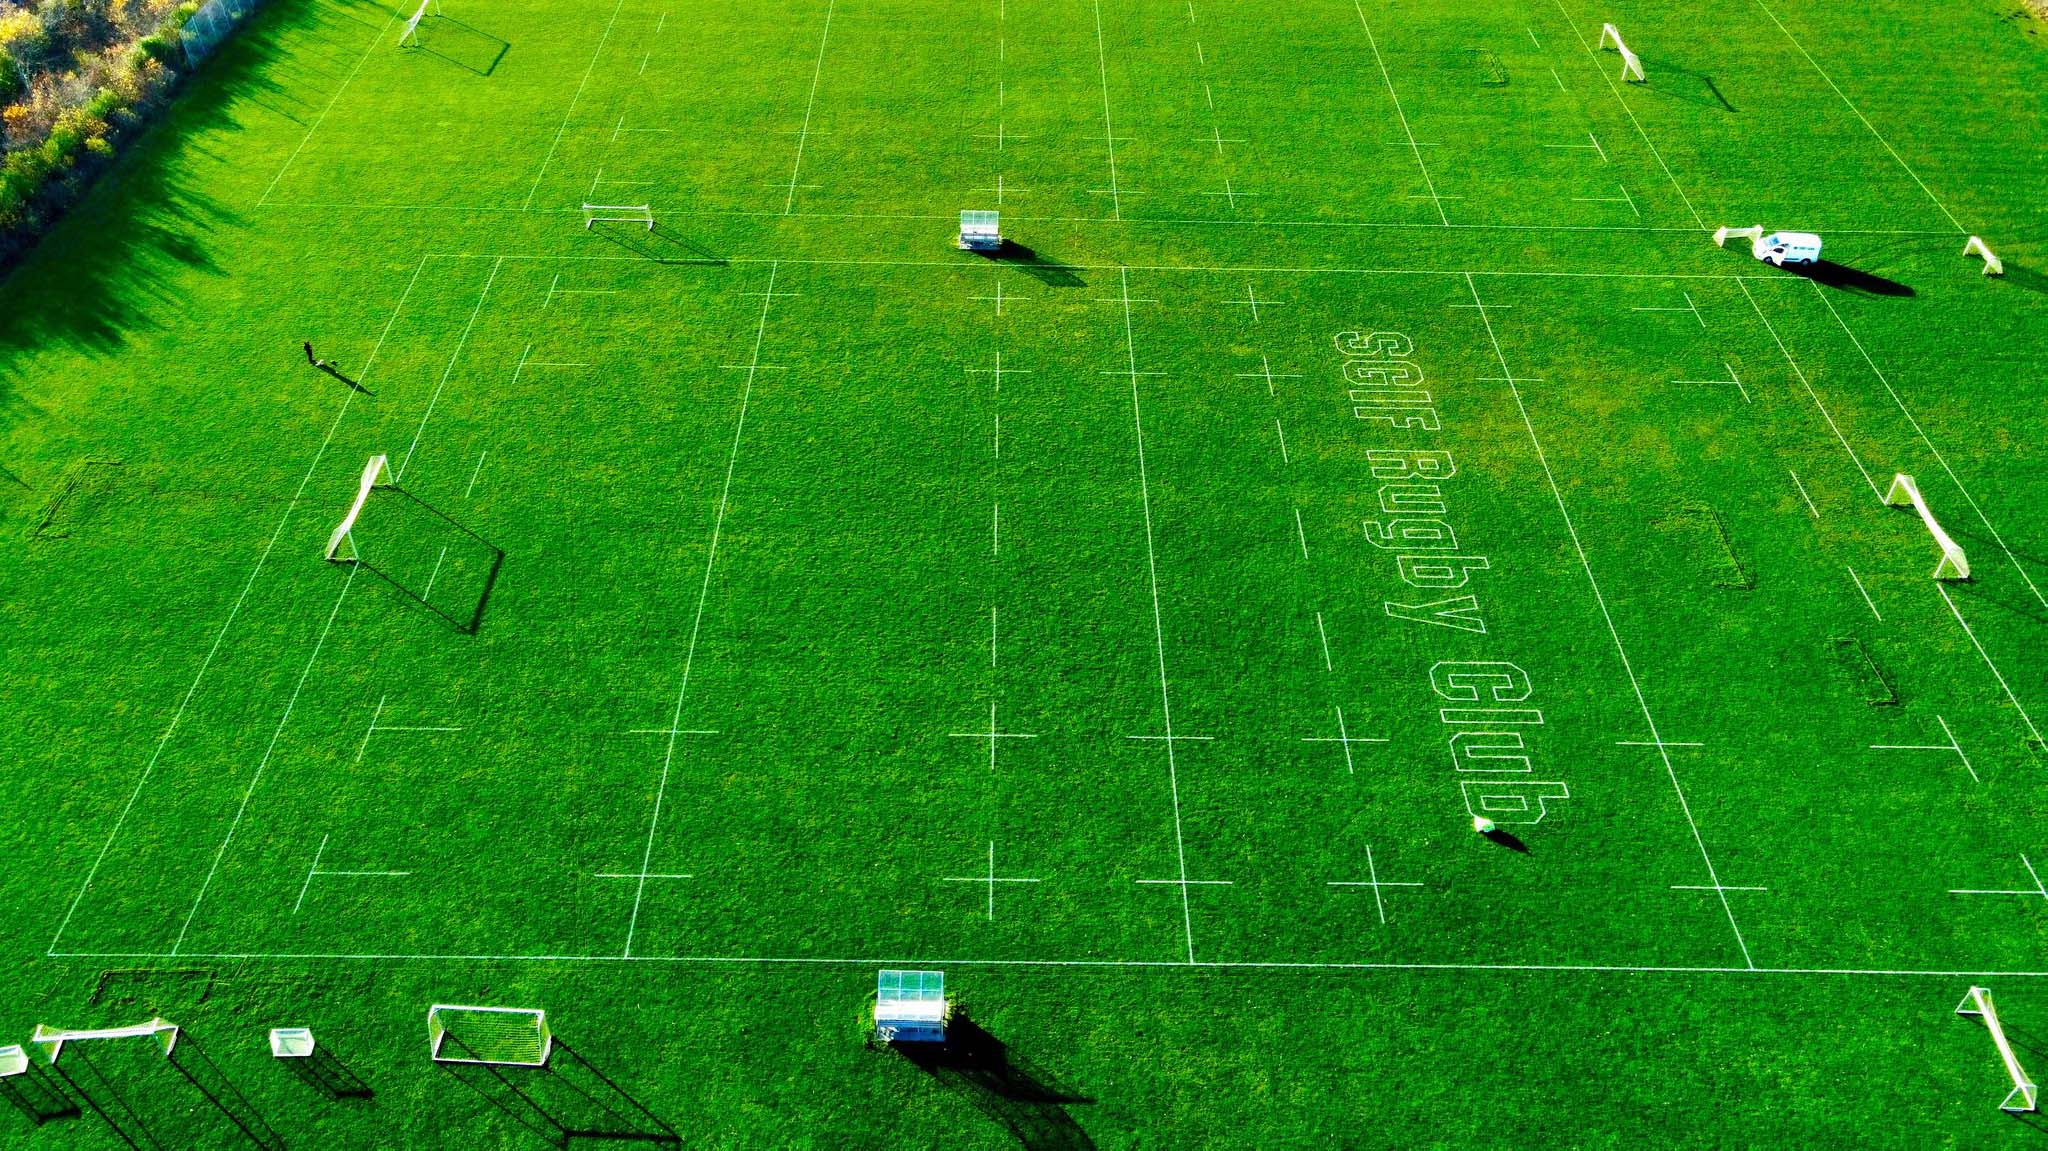 SGIF rugby club's field being painted with their logo in the middle by a Turf Tank one plus robot